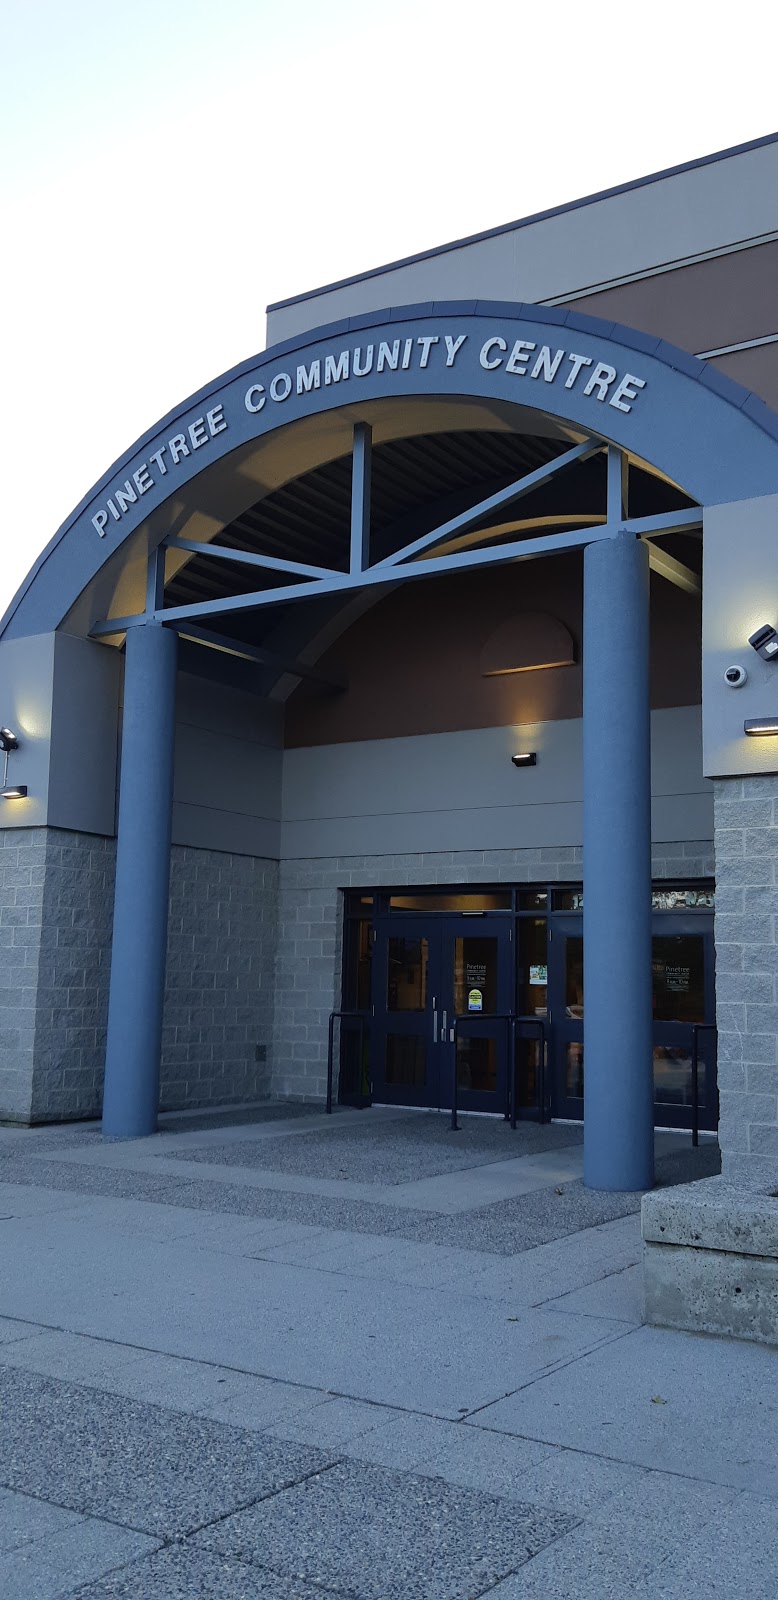 Pinetree Secondary School | school | 3000 Pinewood Ave, Coquitlam, BC V3B 7Y7, Canada | 6044642513 OR +1 604-464-2513